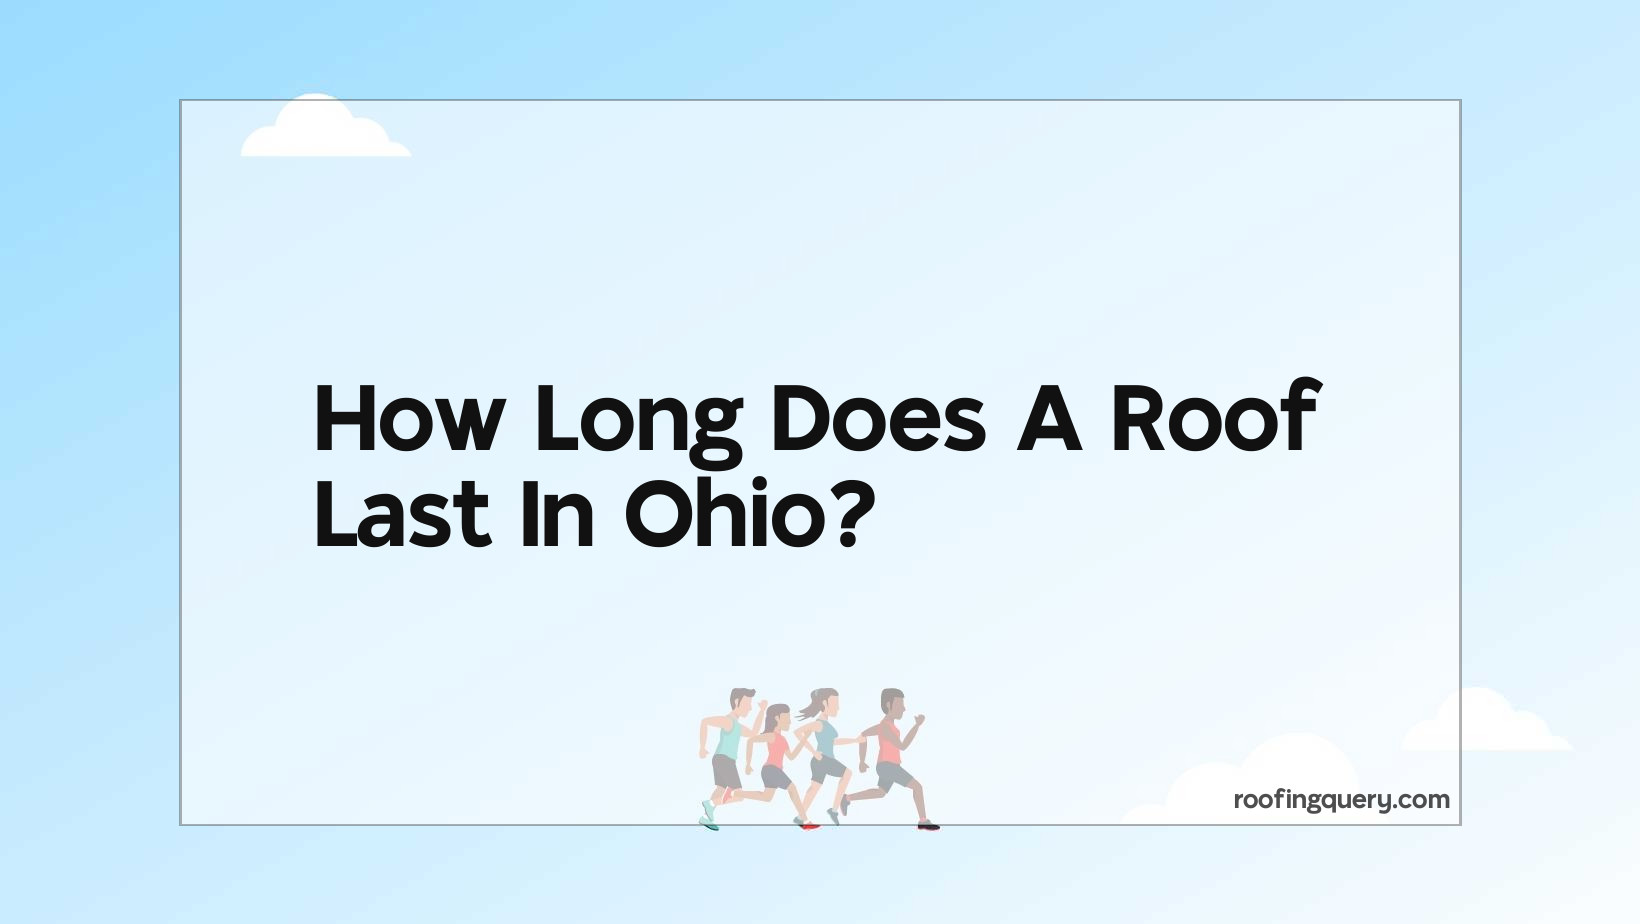 How Long Does A Roof Last In Ohio?